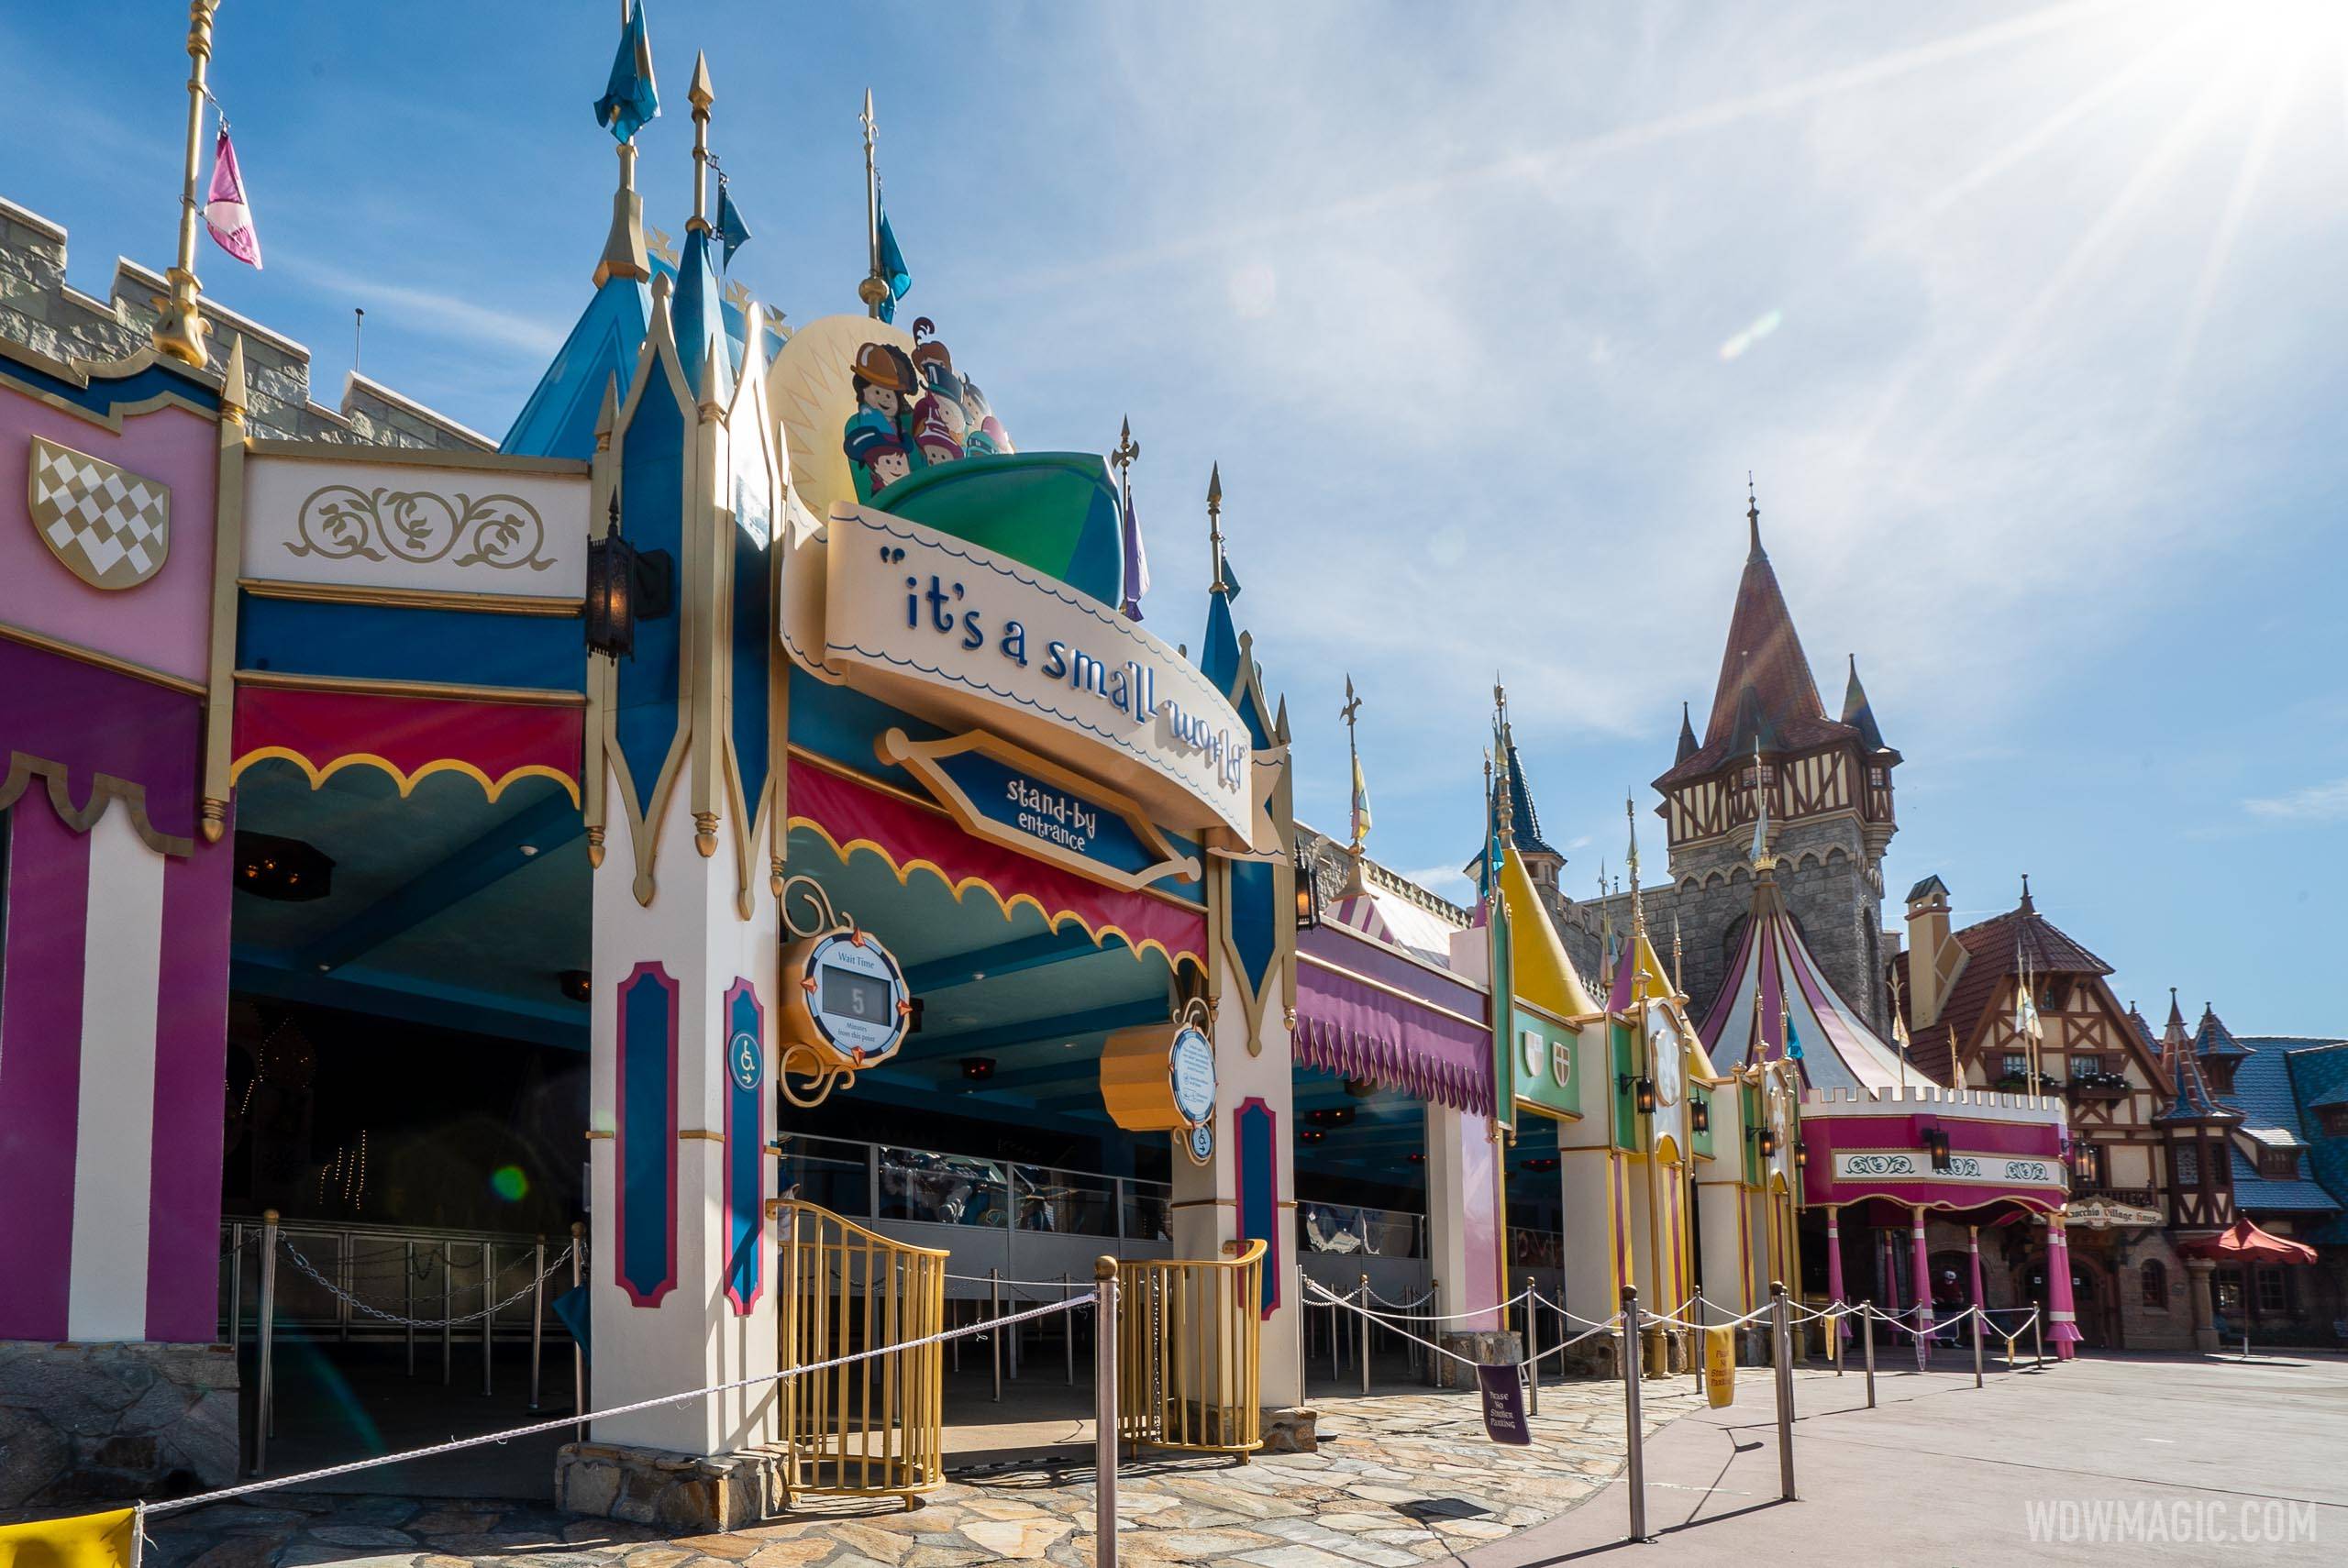 it's a small world queue refurbishment completed